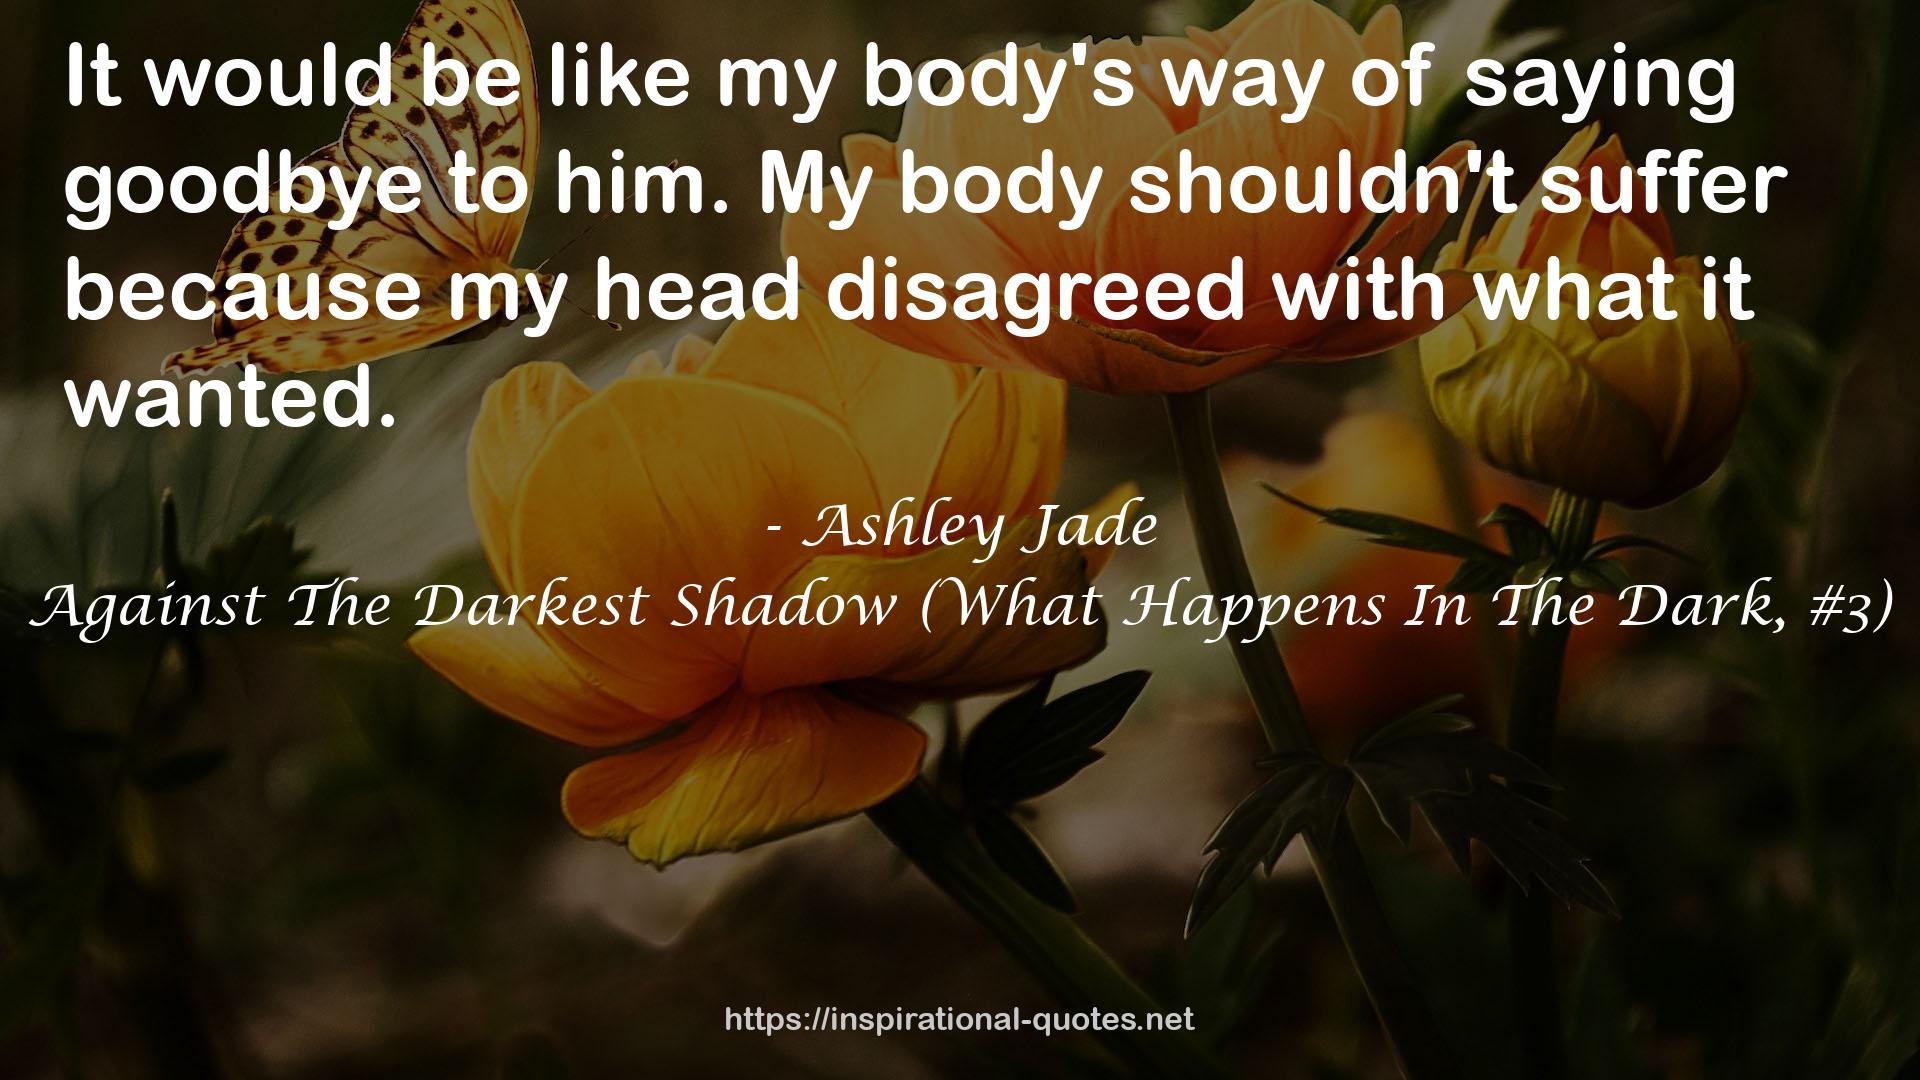 Against The Darkest Shadow (What Happens In The Dark, #3) QUOTES